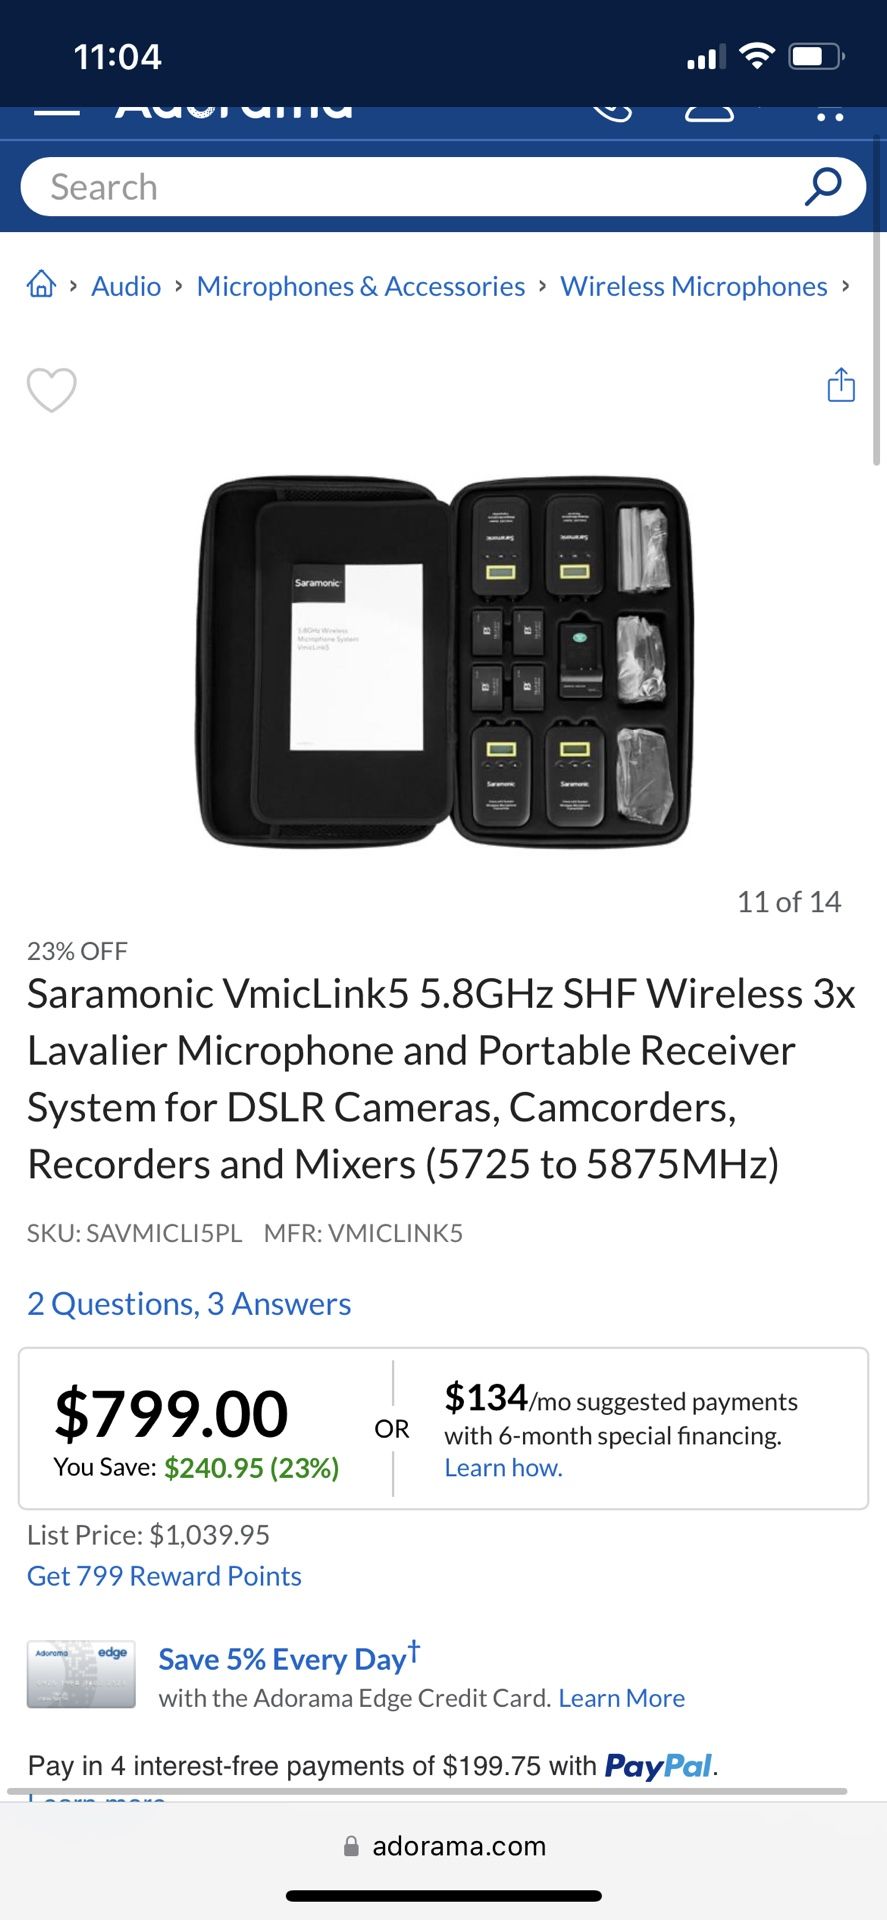 Saramonic VmicLink5 5.8GHz SHF Wireless 3x Lavalier Microphone and Portable Receiver System